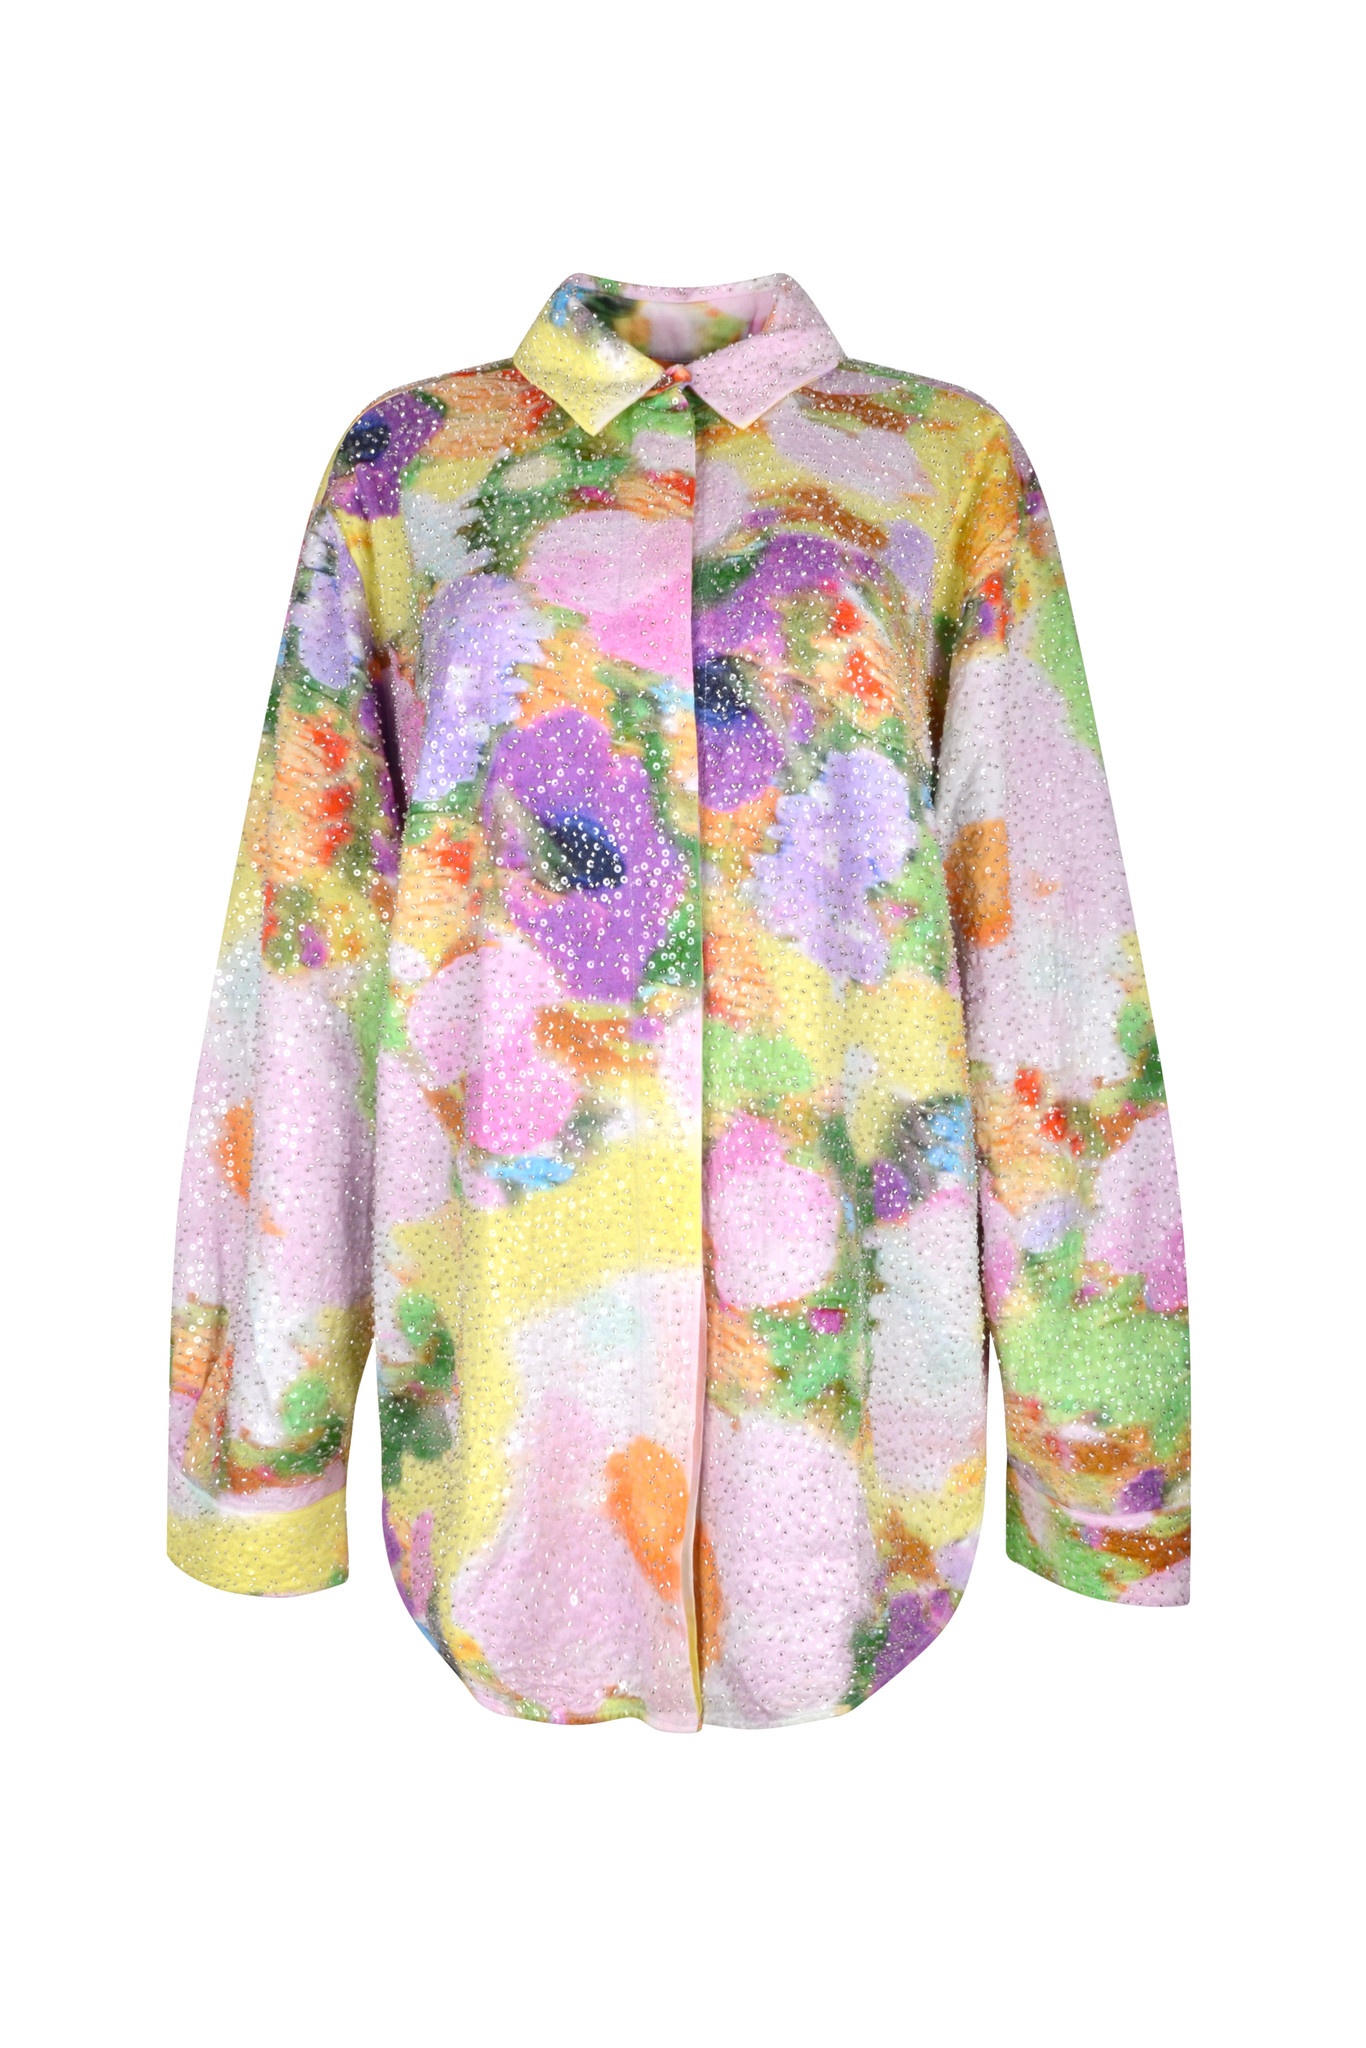 Sophia Shirt in Faded Floral-1